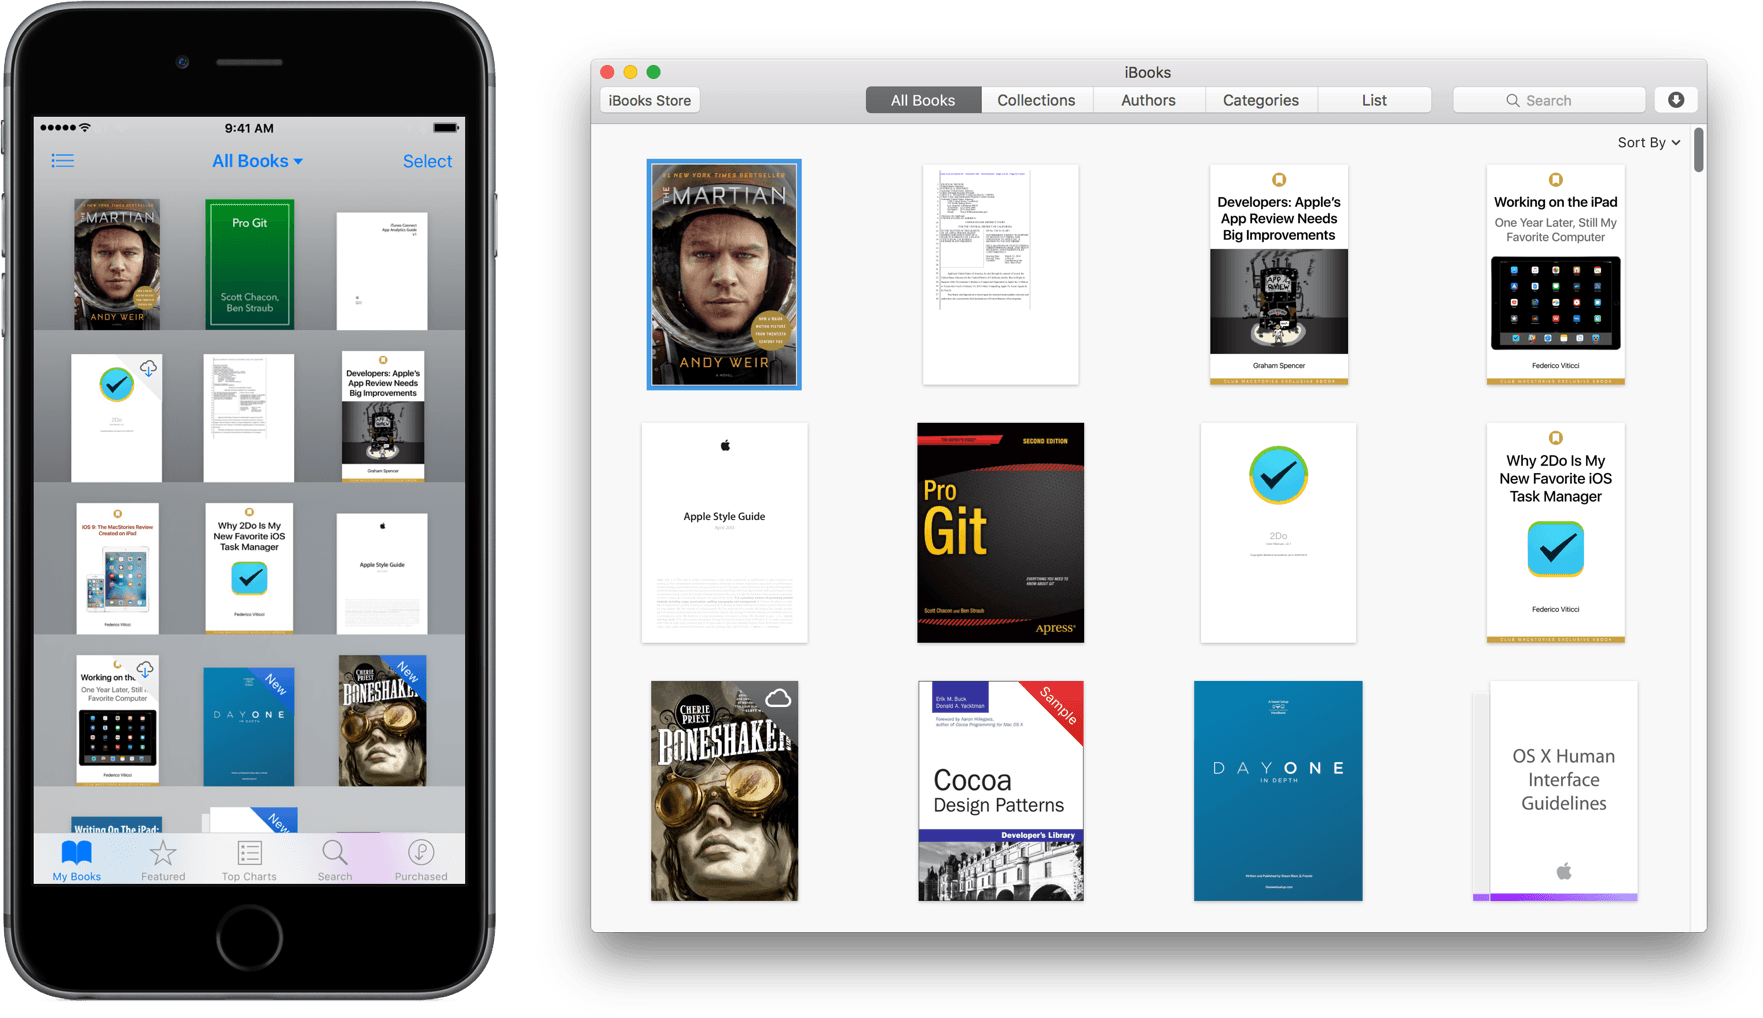 PDFs and ePUB books sync between iBooks for iOS and Mac.